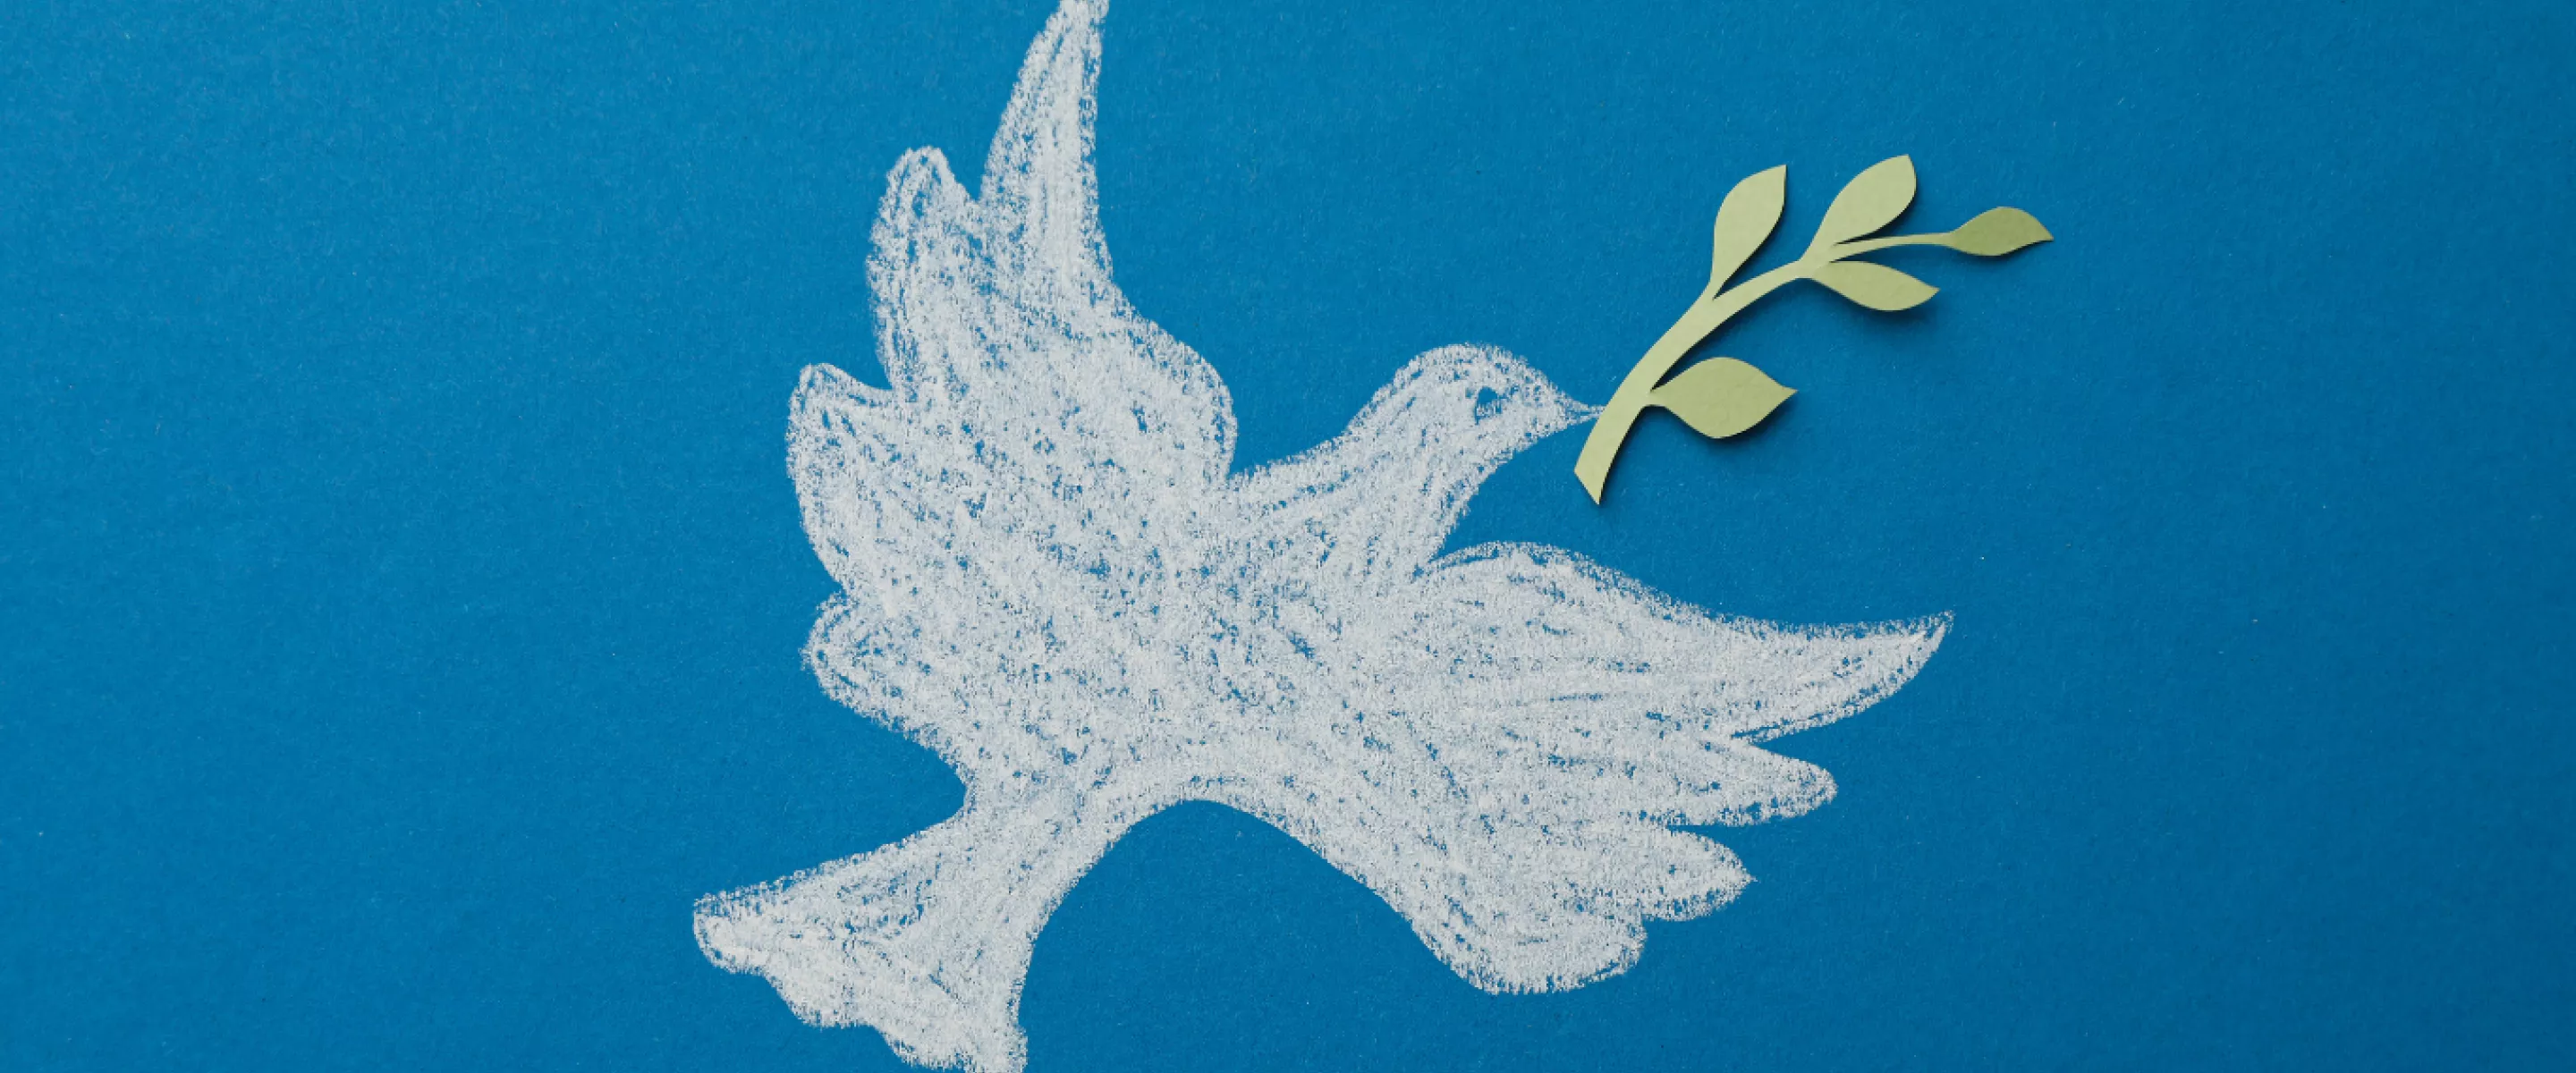 A chalk drawing of a white dove with a green olive branch in its beak